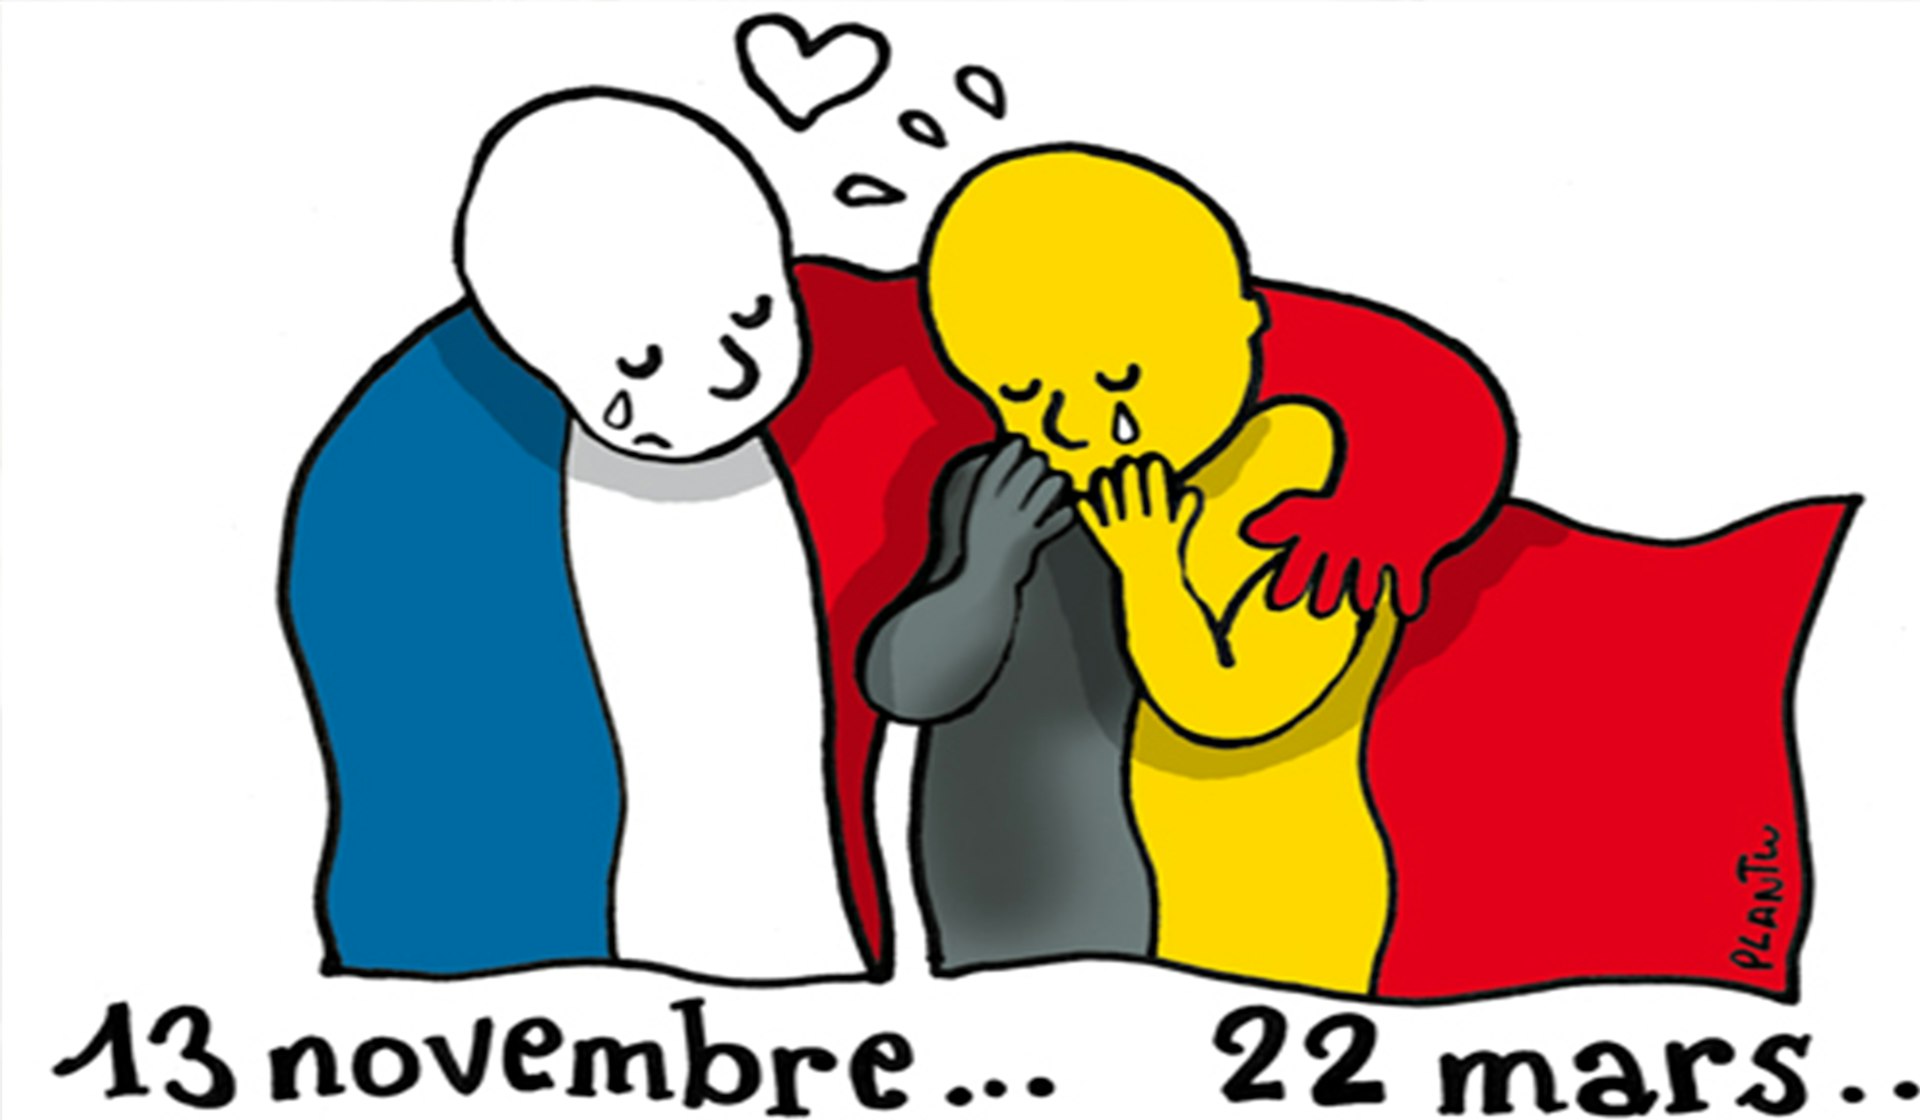 Artists respond to the Brussels terror attacks